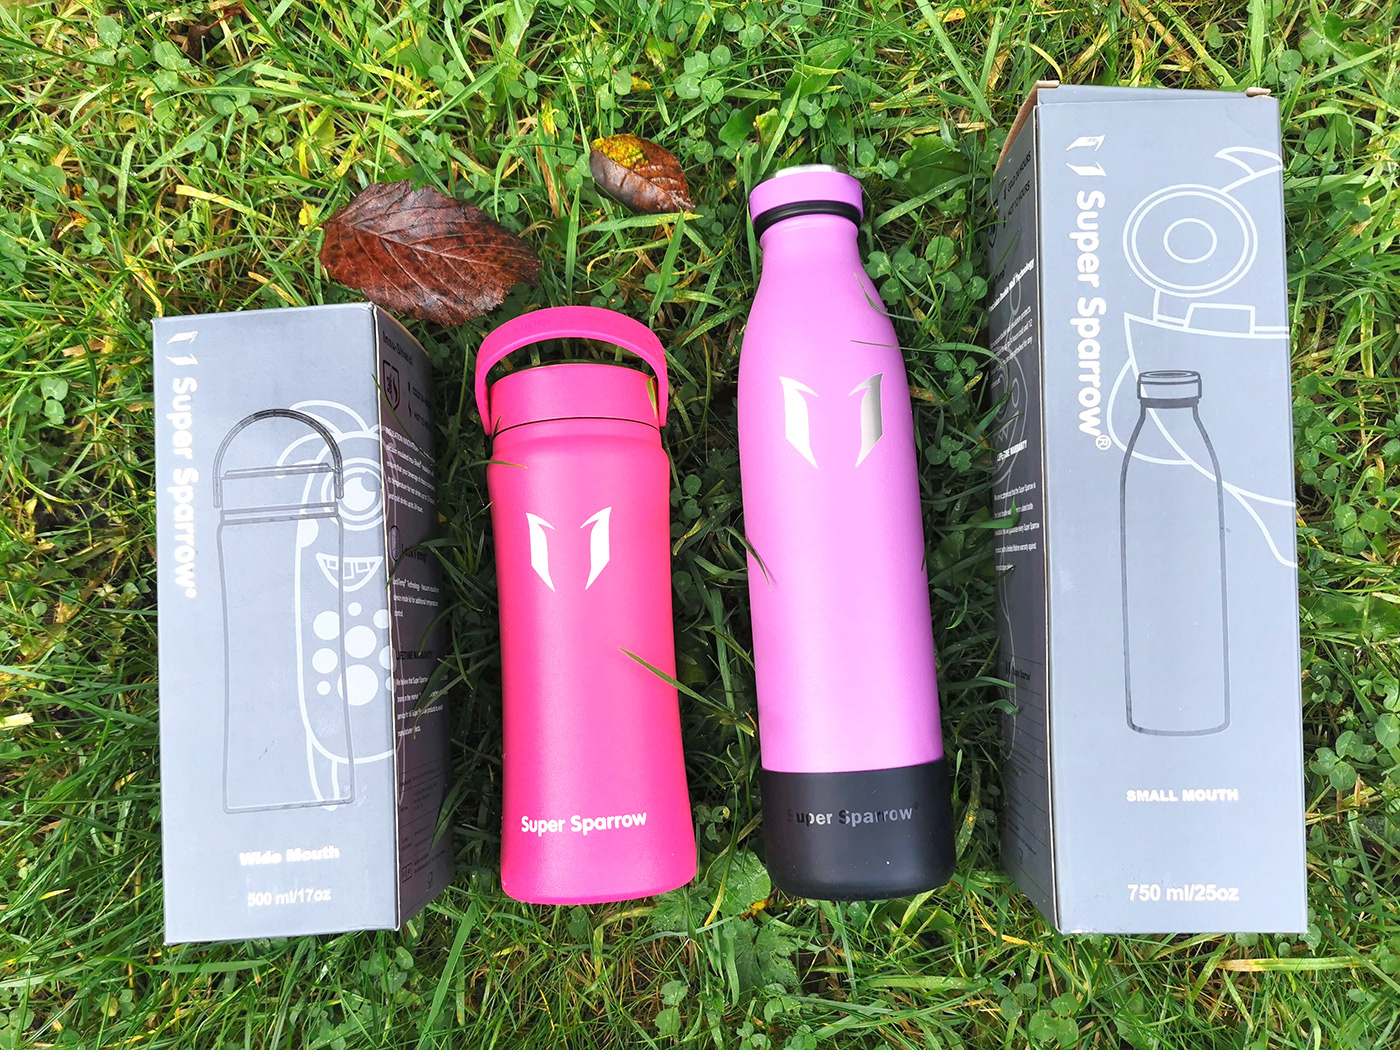 Super Sparrow Insulated Water Bottle Review